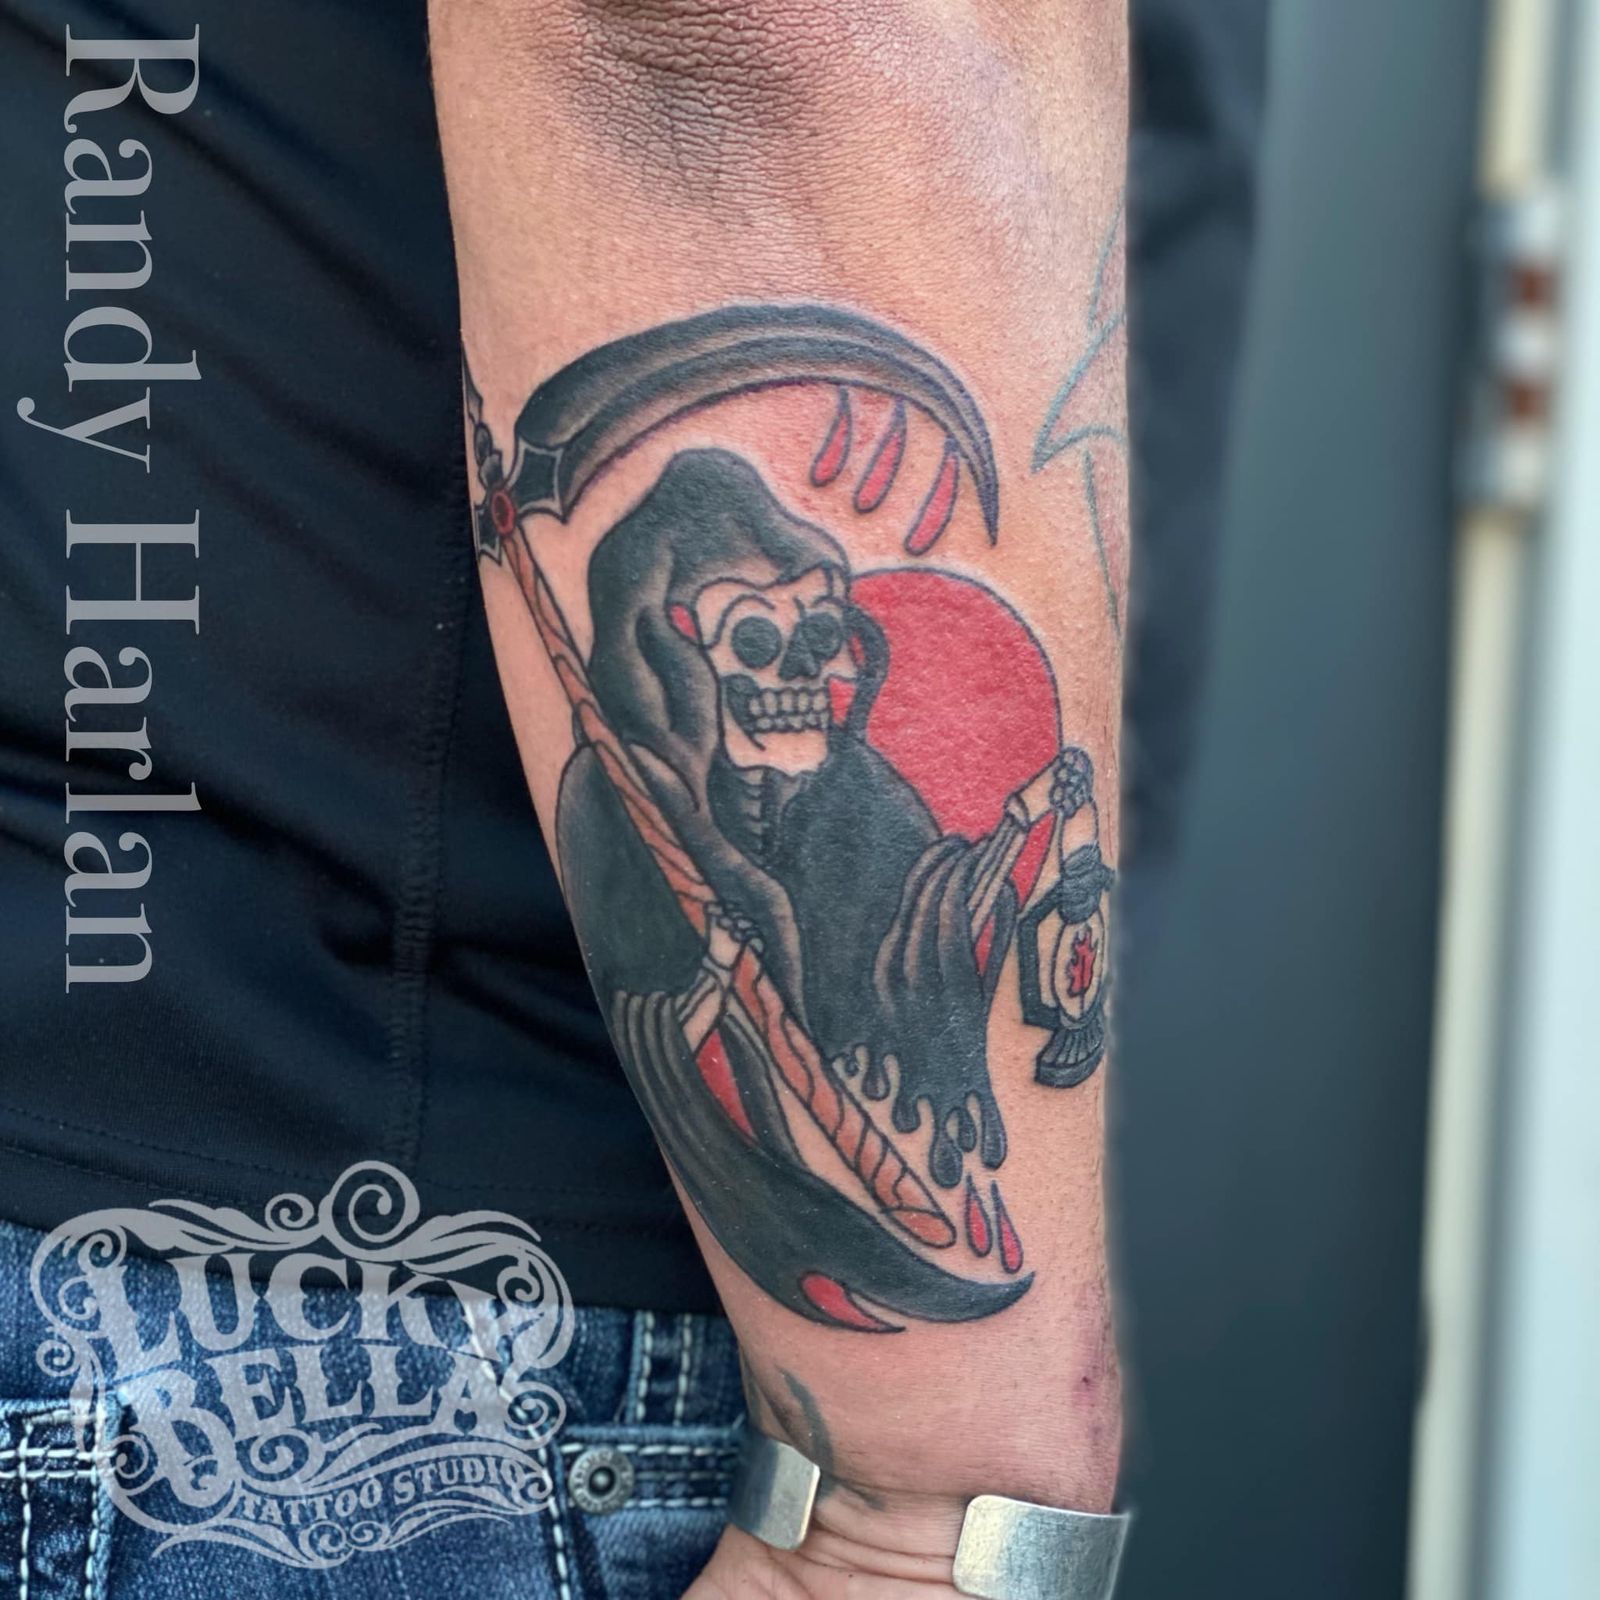 Redbeards Living Canvas Tattoos and Piercings  Tattoo Parlor in Hot  Springs